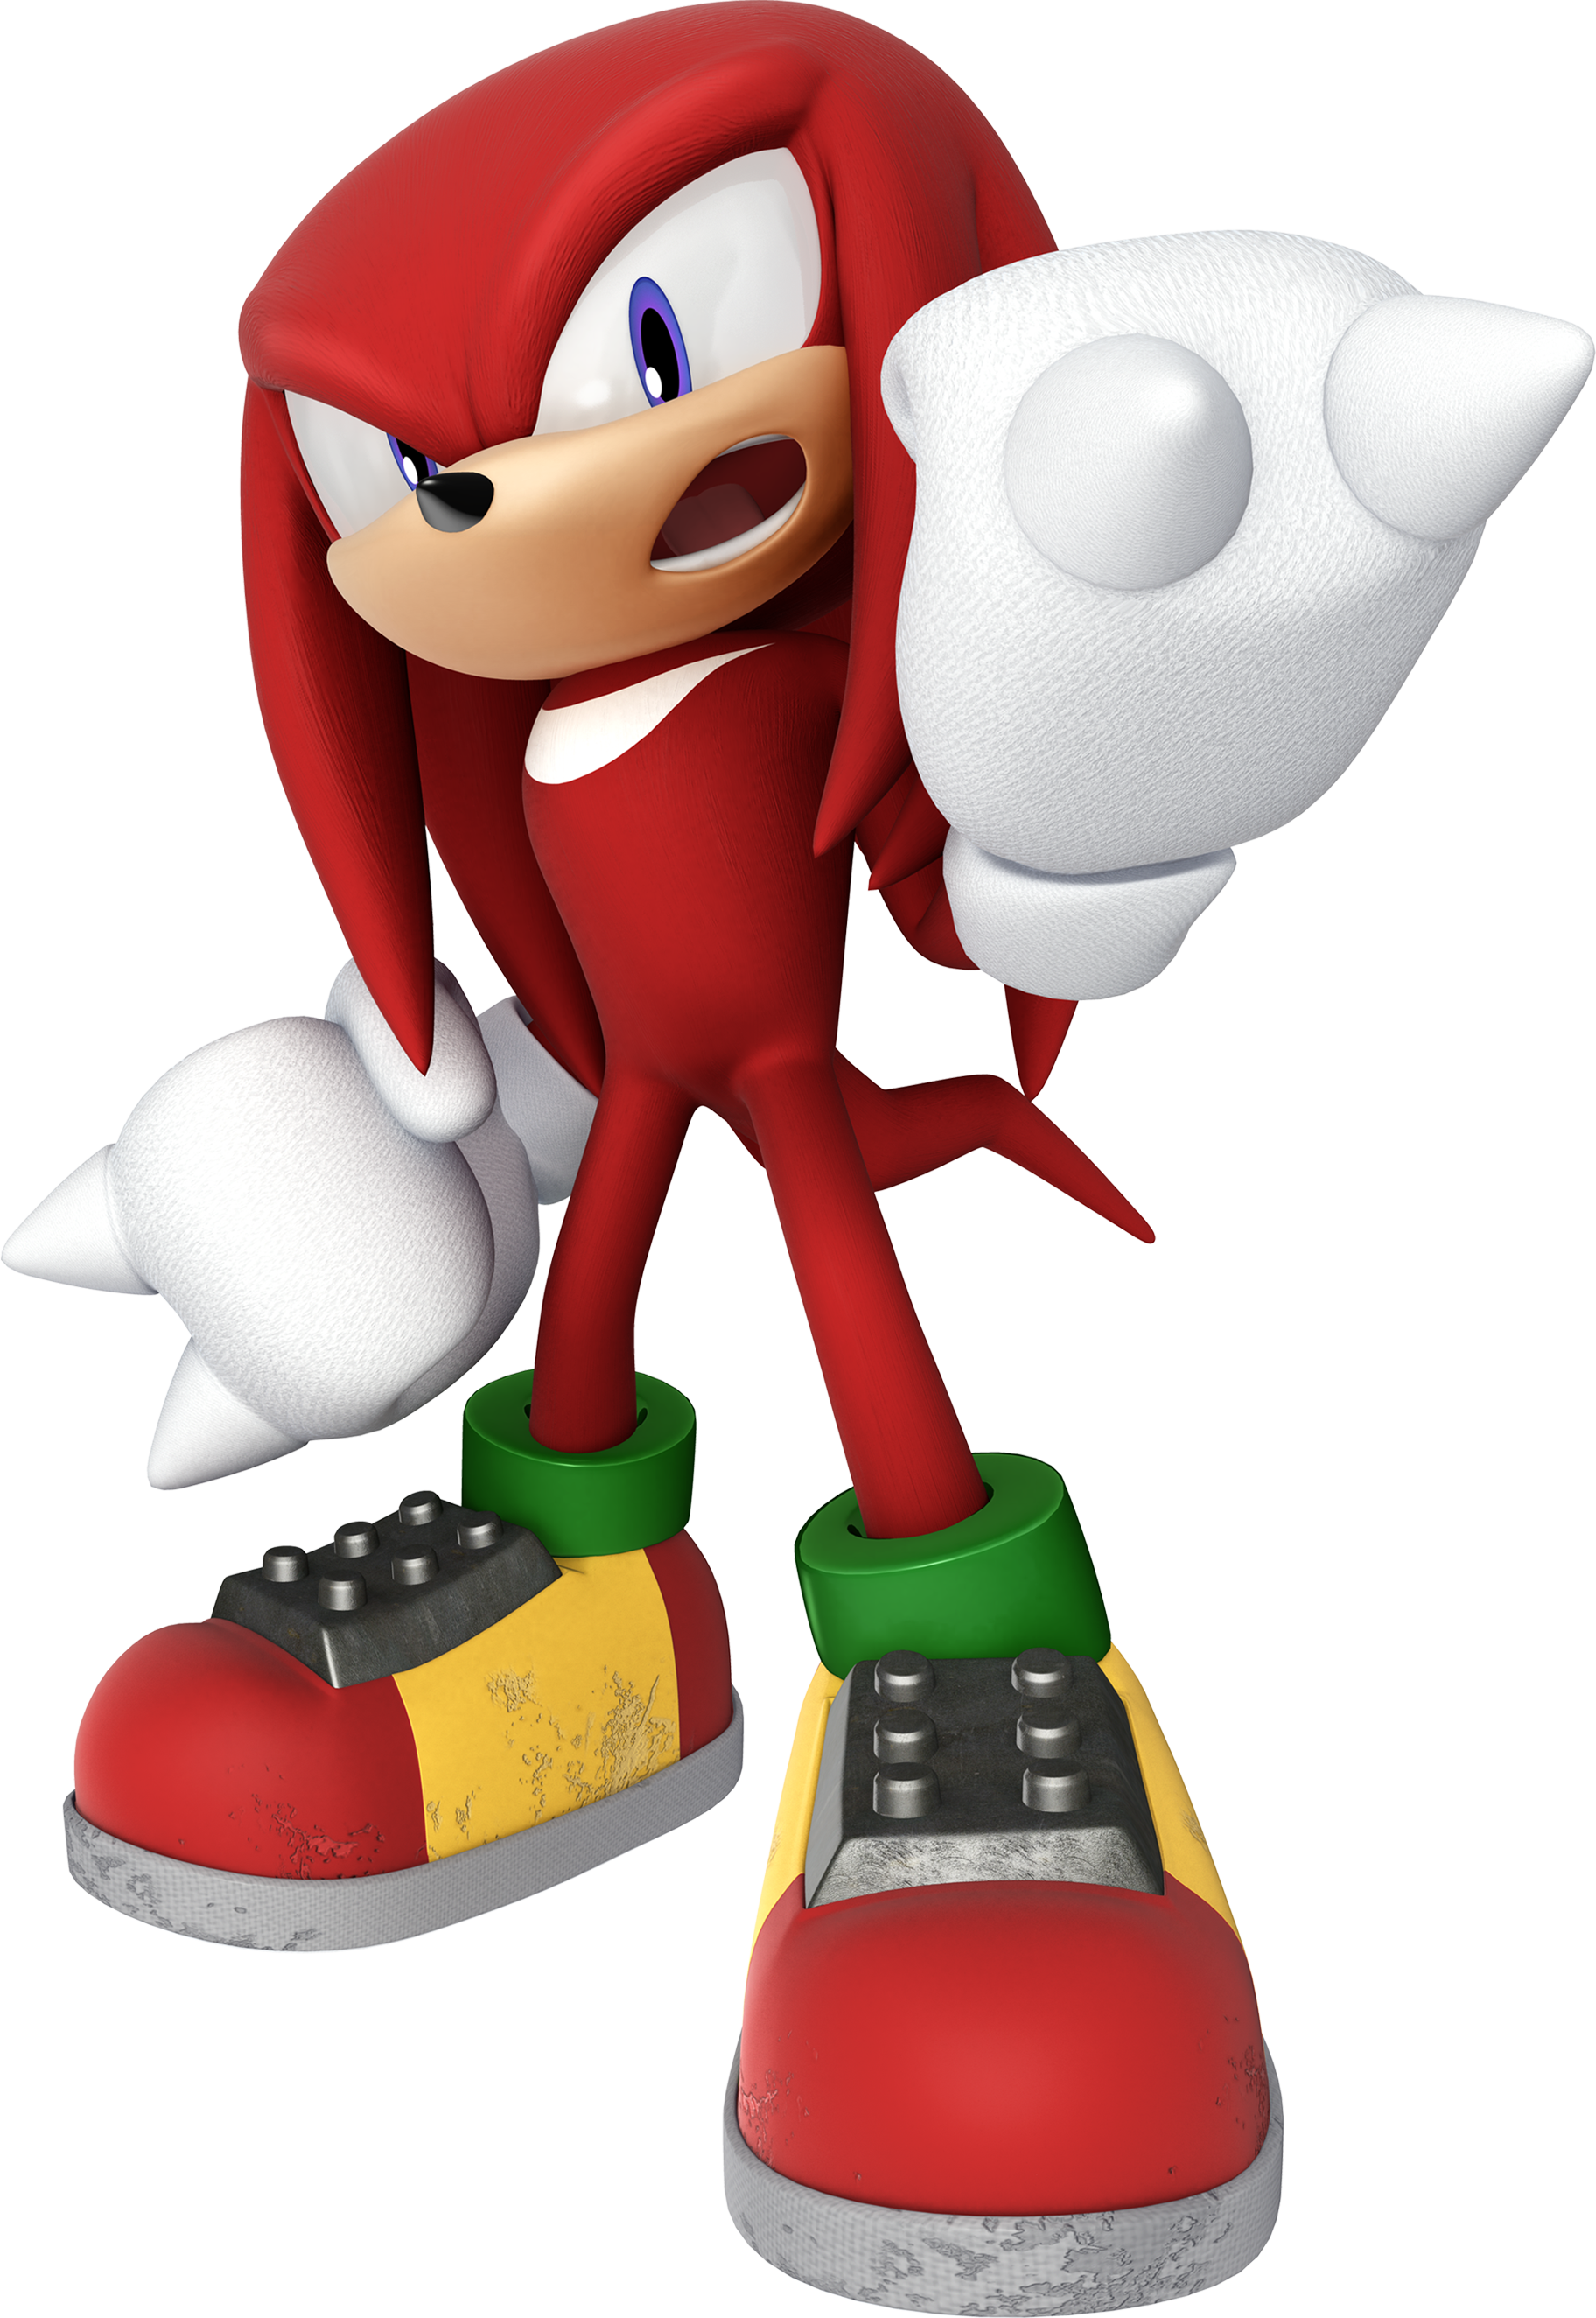 Pointing clipart knuckle. Knuckles sonic the heghog